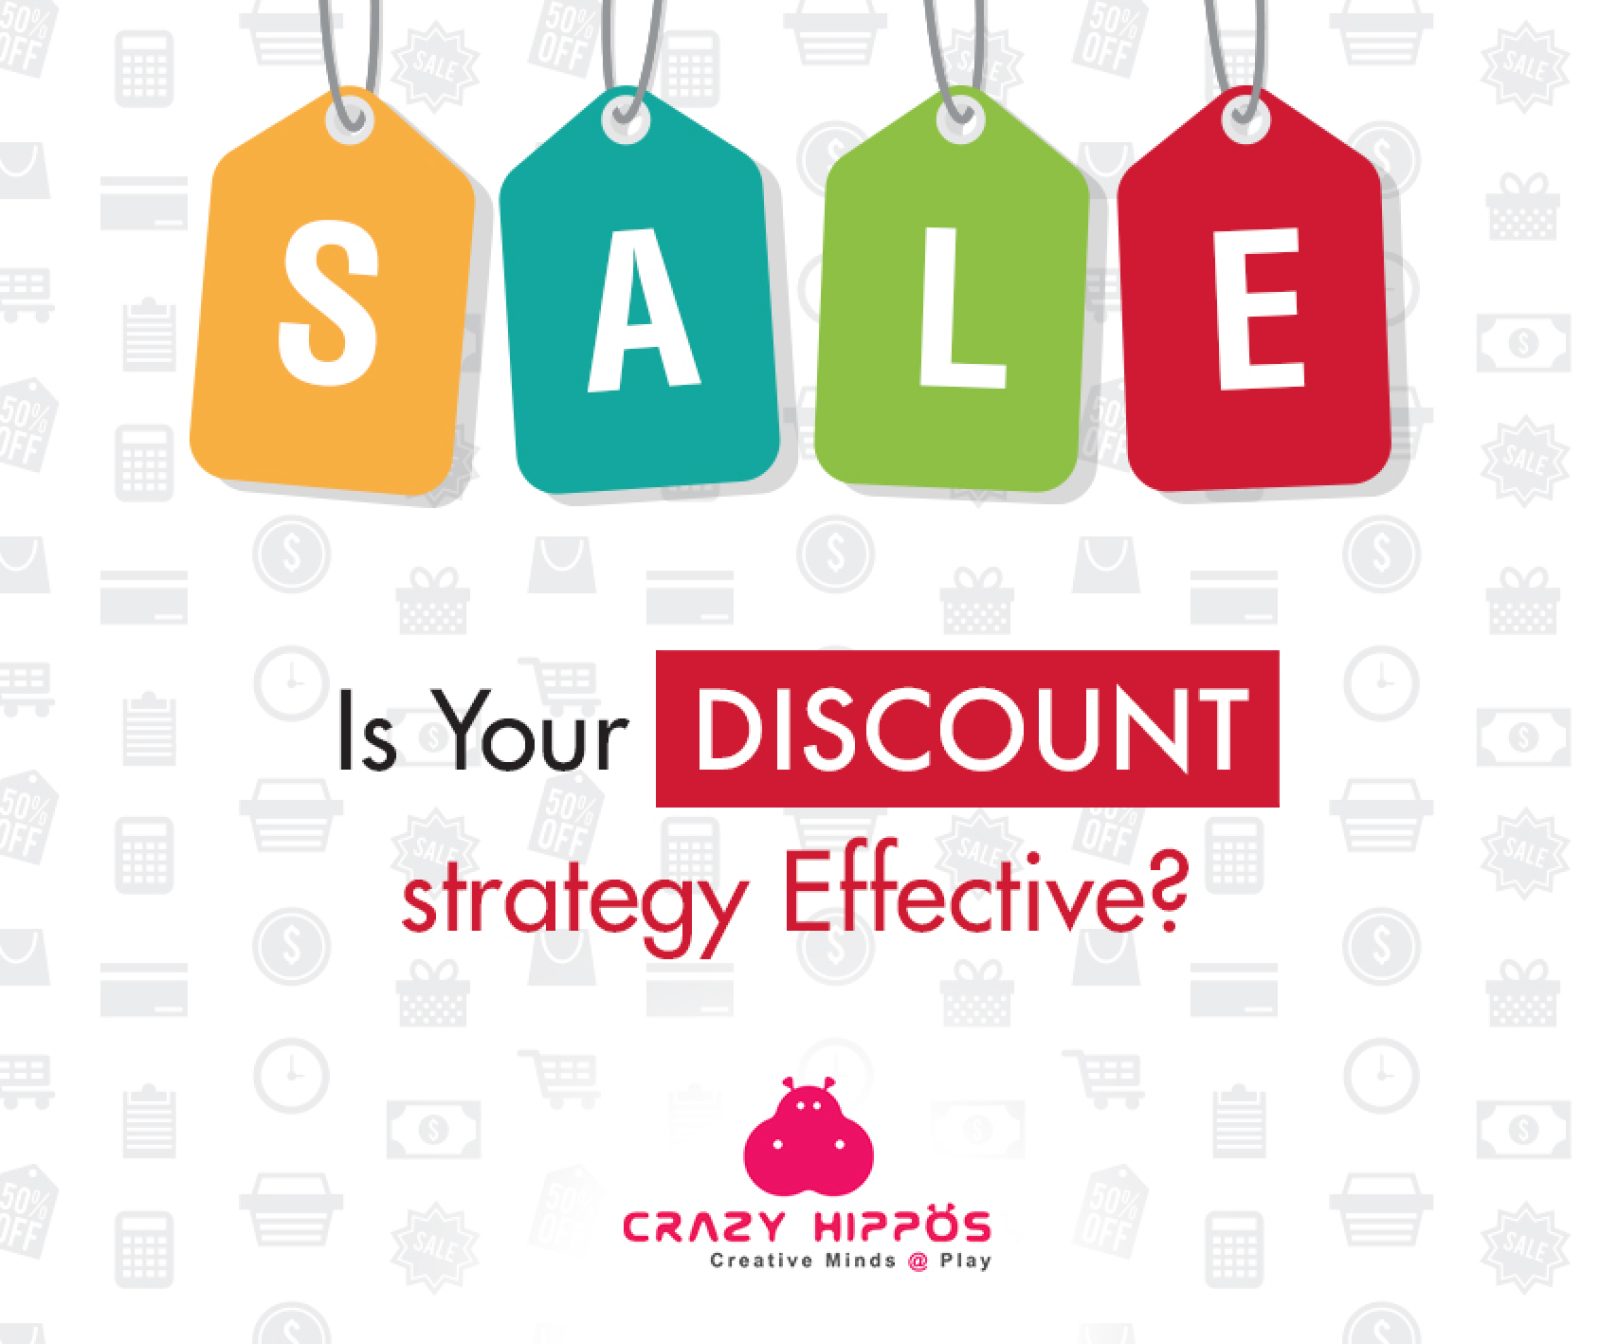 HOW STRONG IS YOUR SALE STRATEGY THIS FESTIVE SEASON?